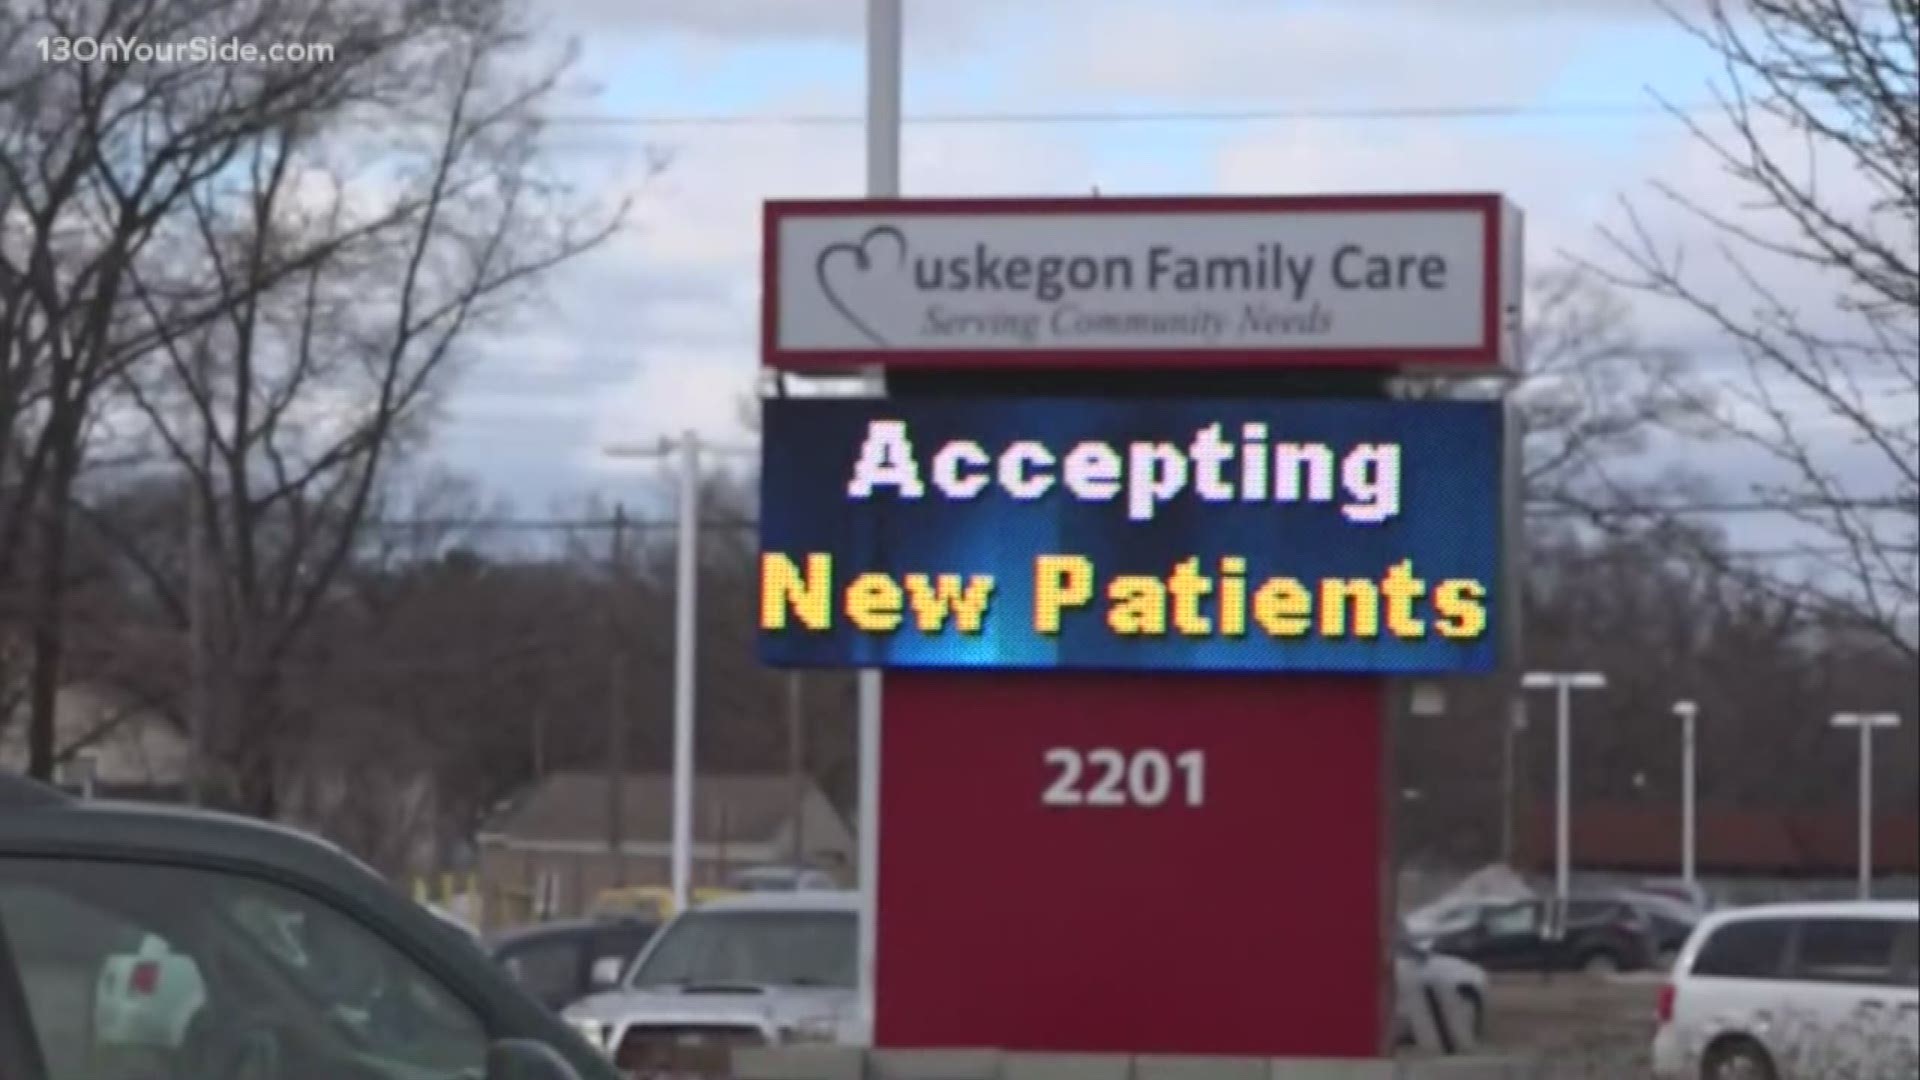 Muskegon Family Care (MFC) announced Friday they are appointing a new CEO. Daniel Oglesby, the new CEO, said the facility will remain open.